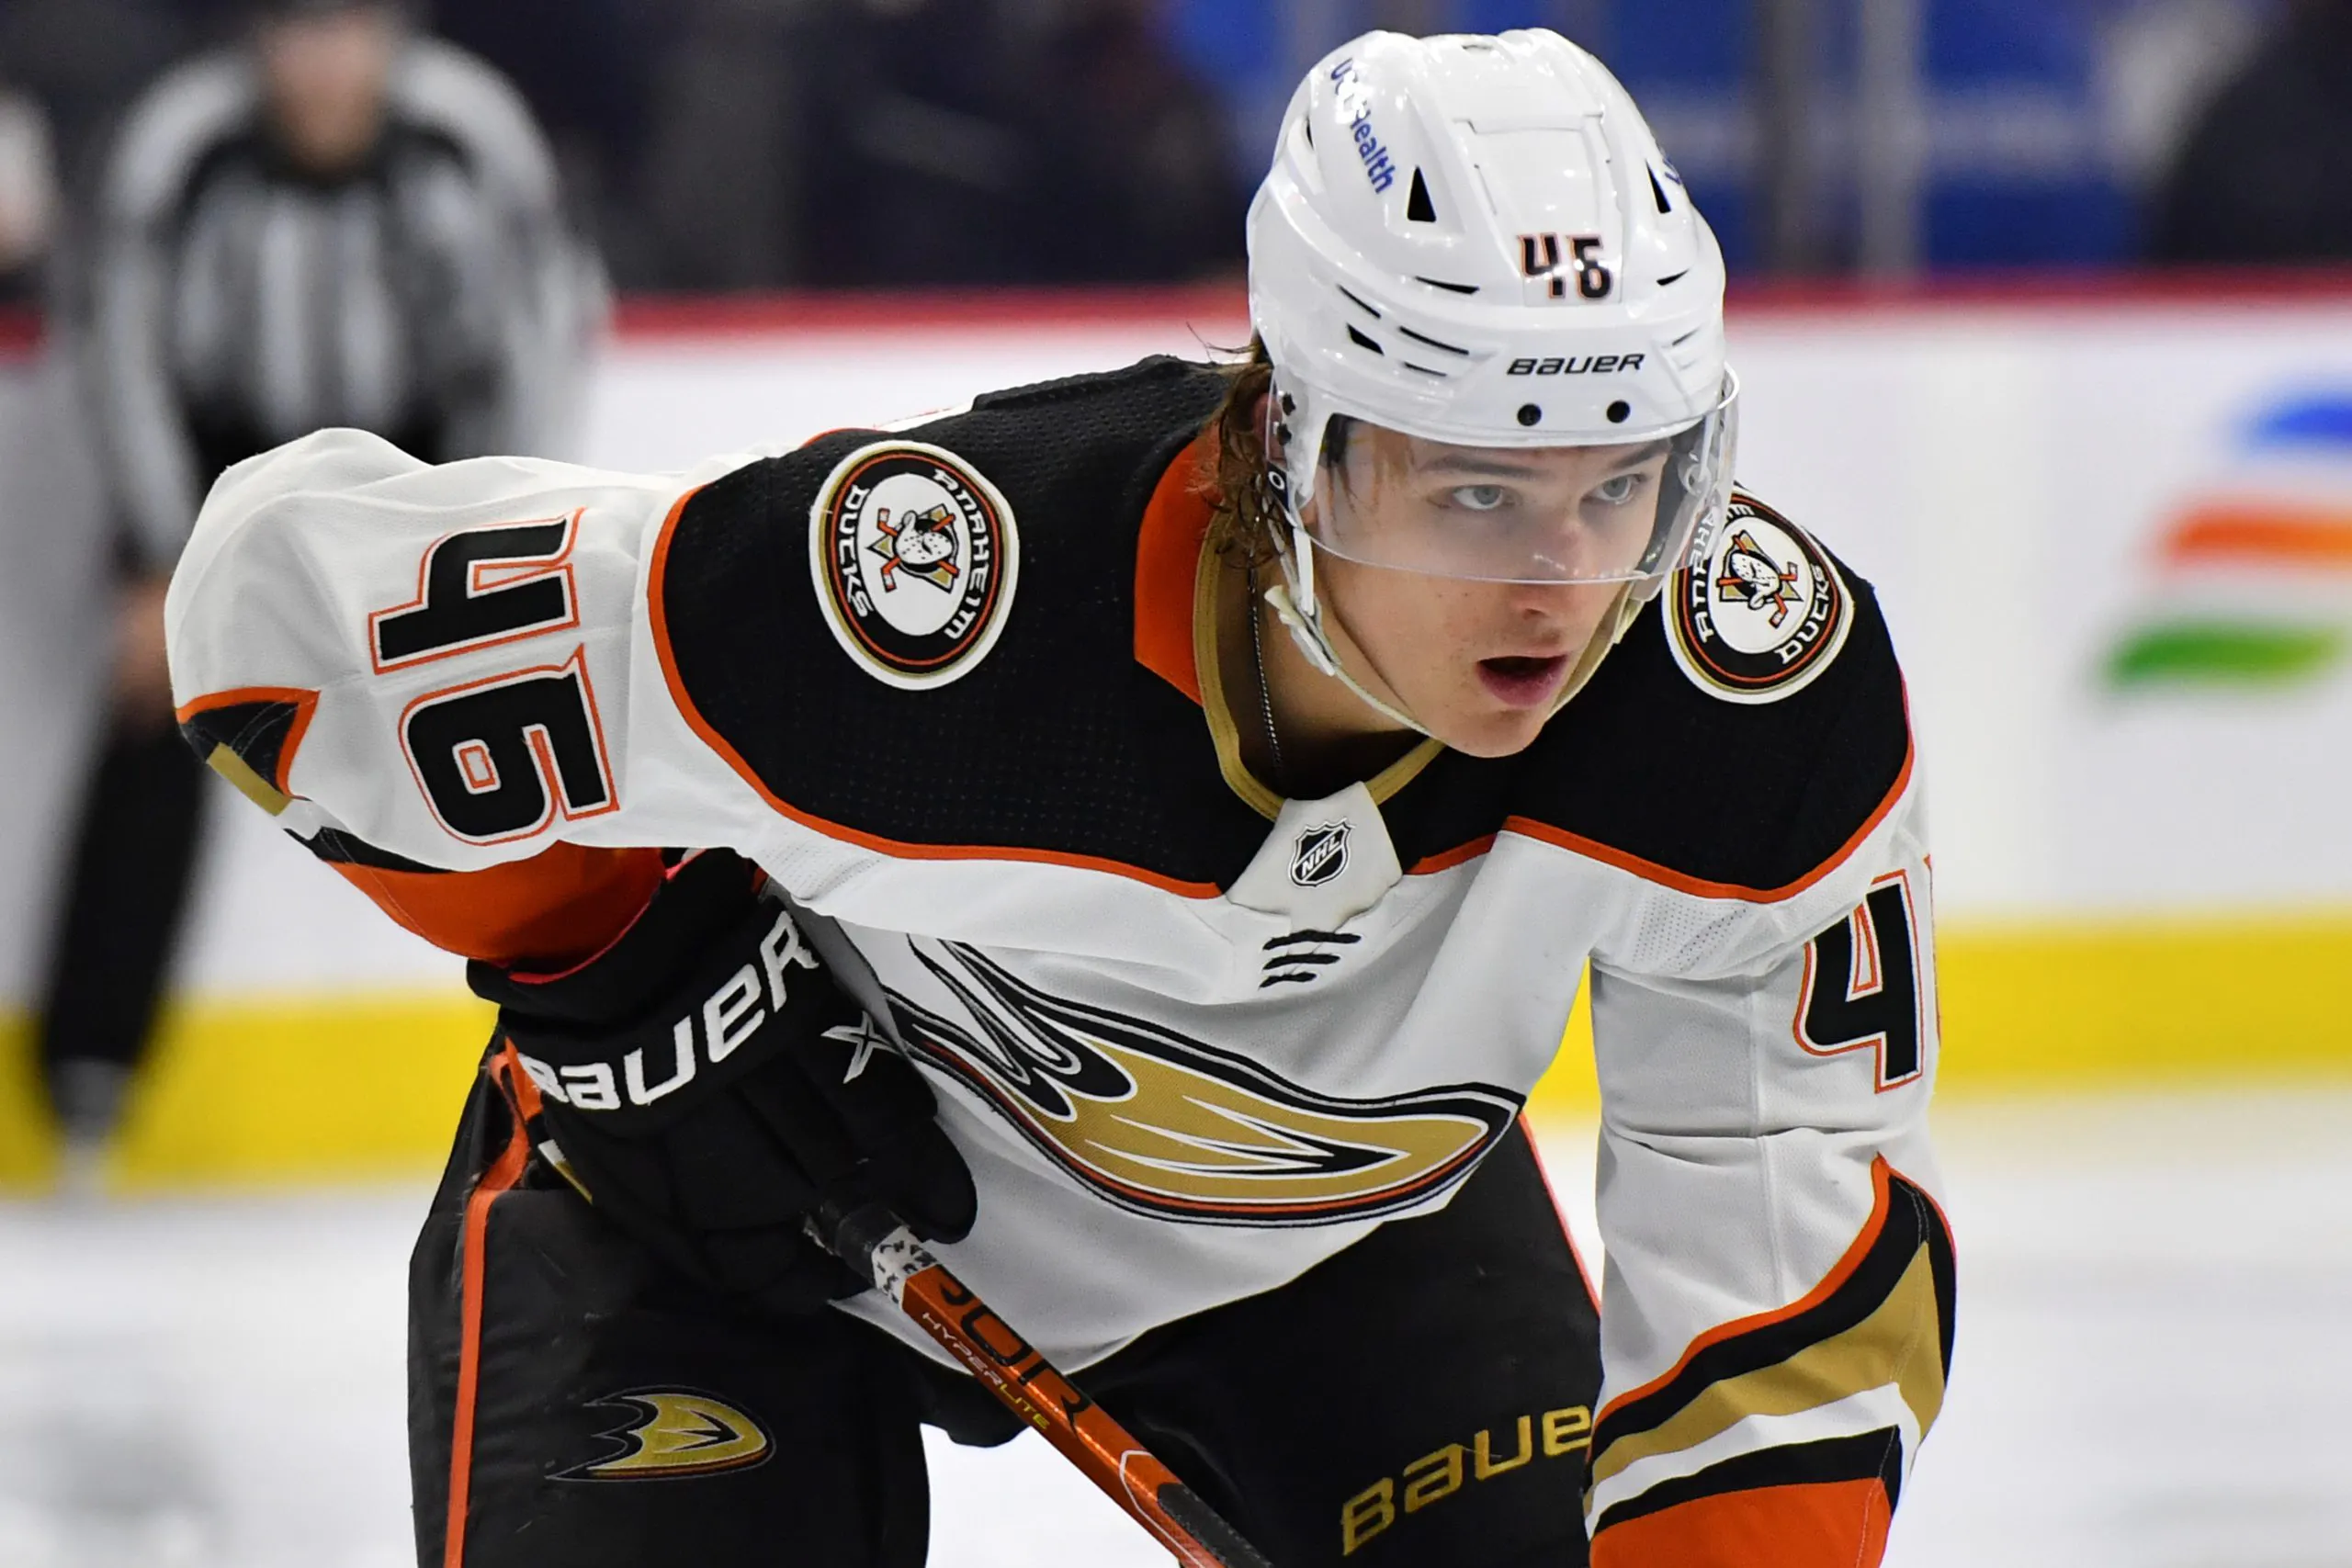 Huge hit forces Anaheim Ducks forward Trevor Zegras from game with upper-body injury